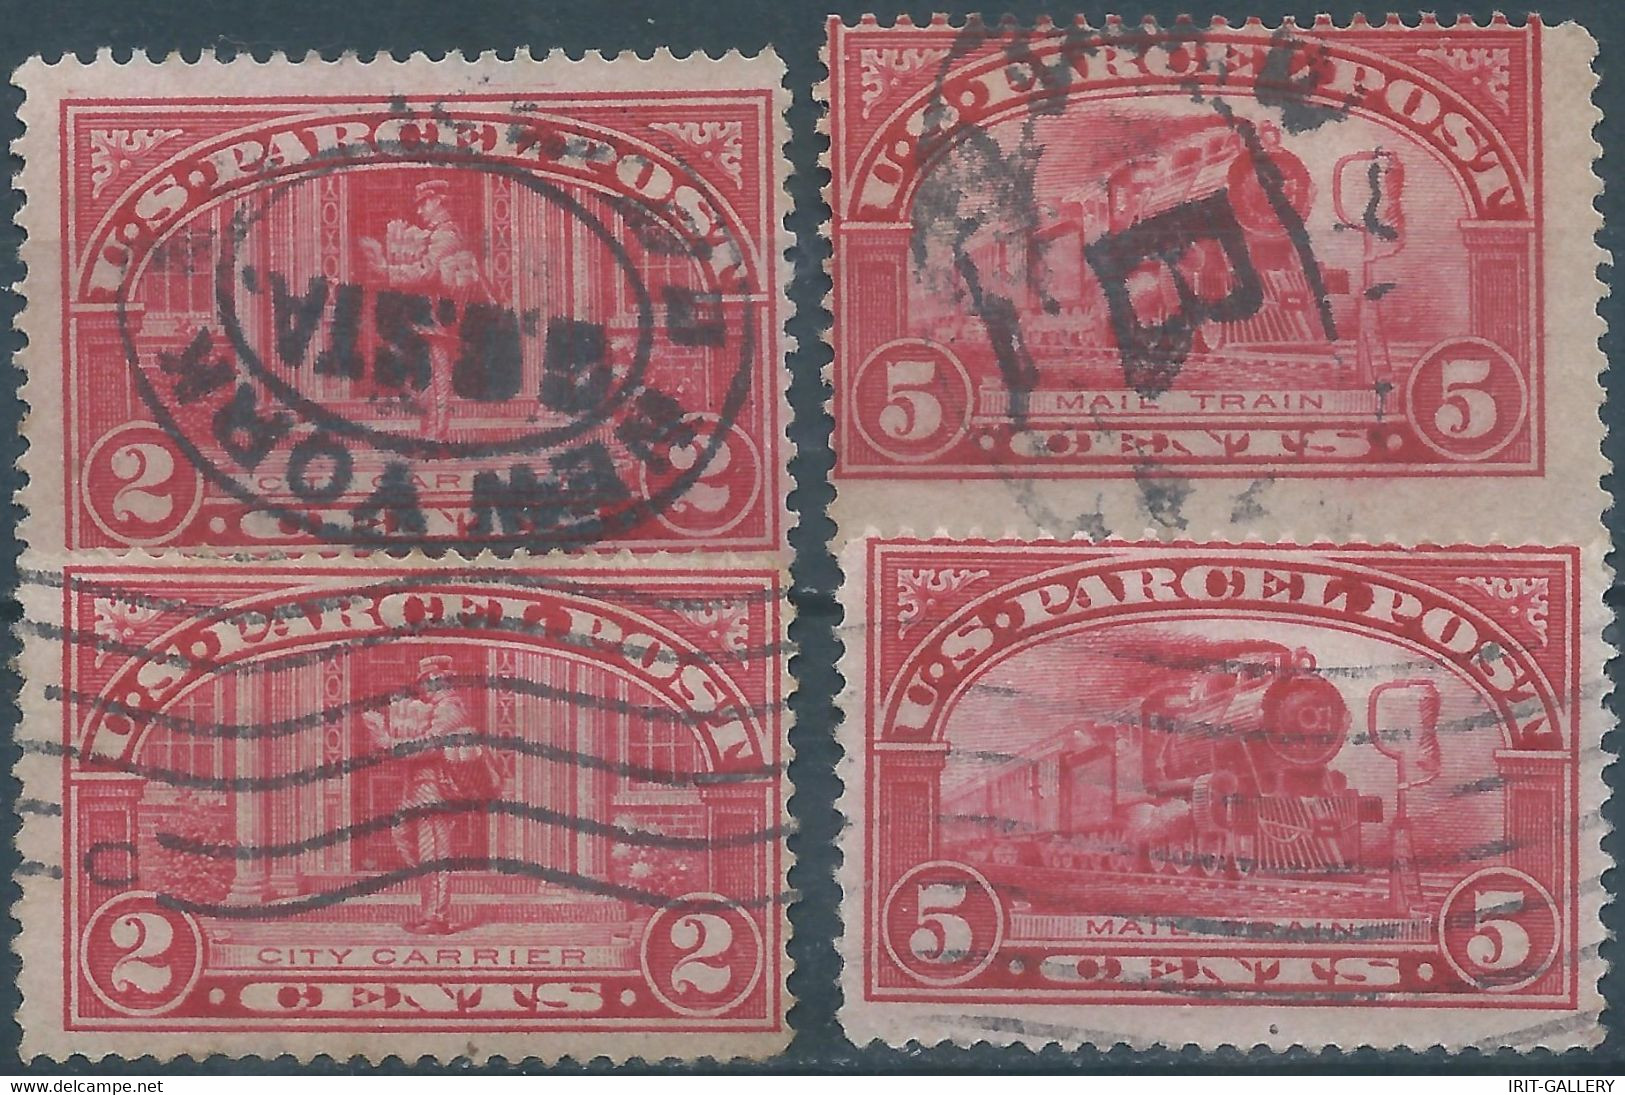 340-United States,U.S.A,Revenue Stamps PARCEL POST,2&5c,Used - Pacchi